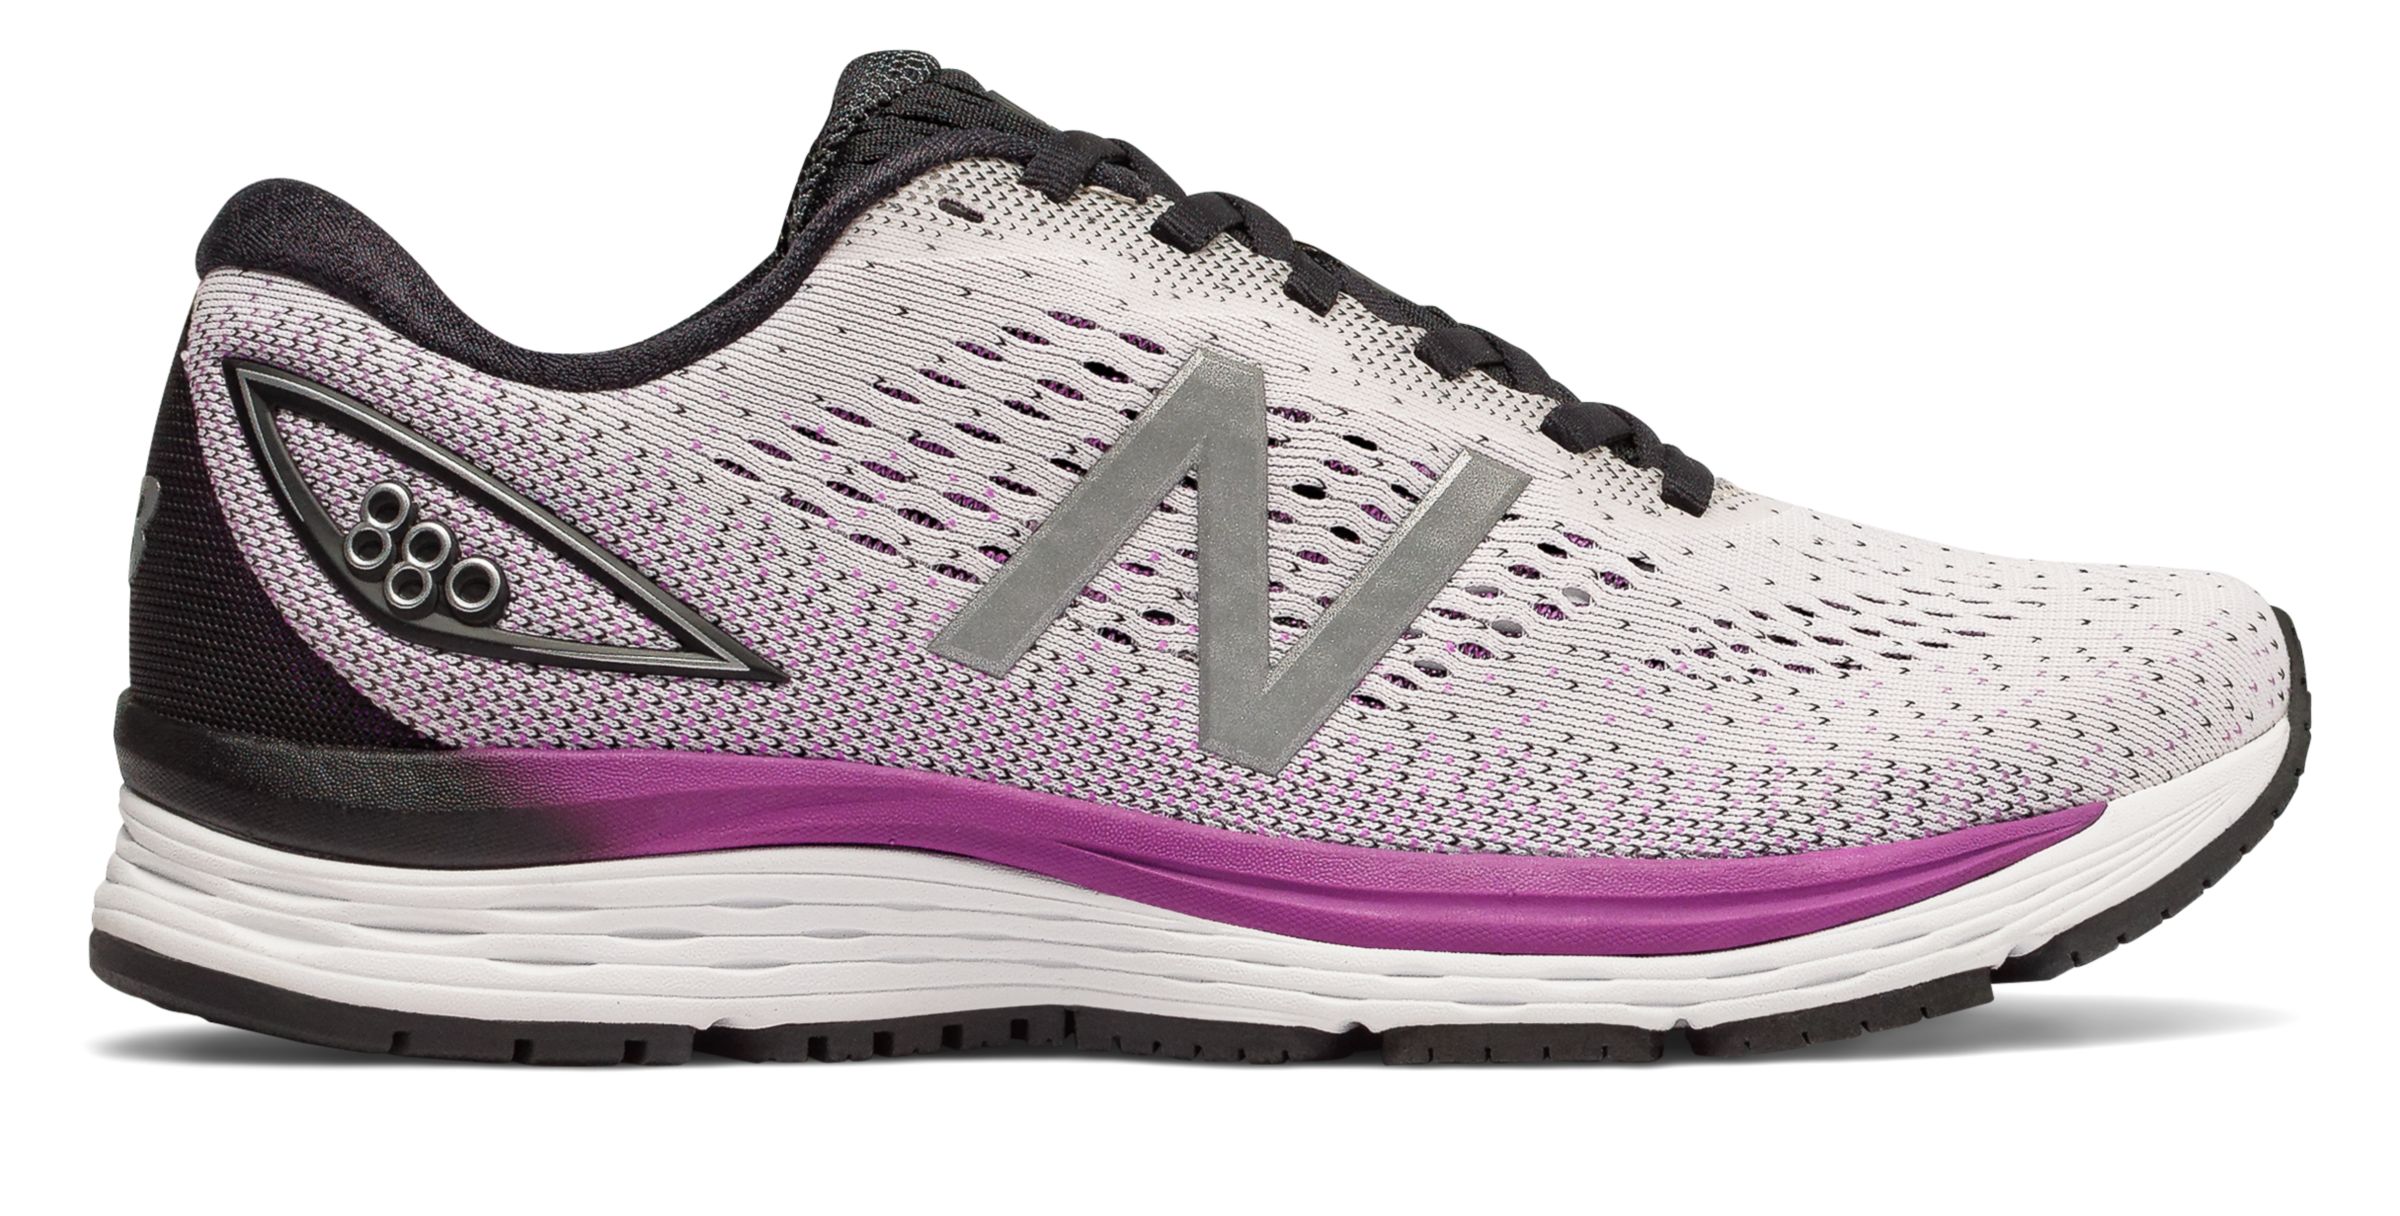 Women's Sneakers & Athletic Apparel | New Balance